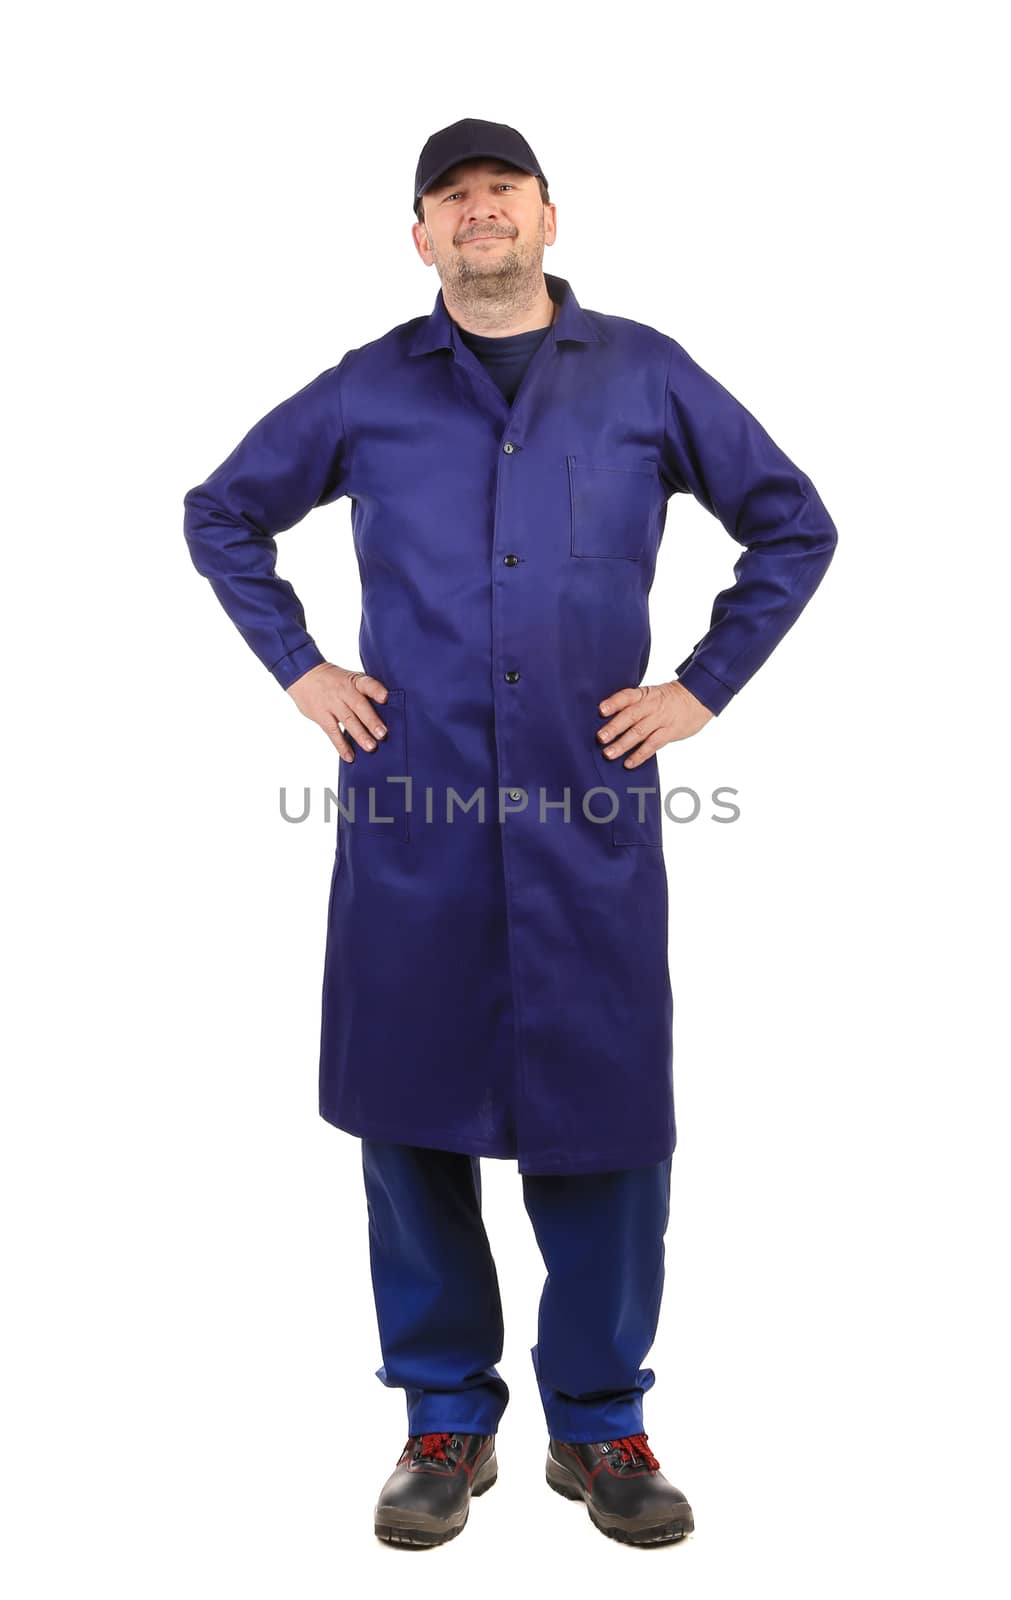 Worker wearing long robe. Isolated on a white background.